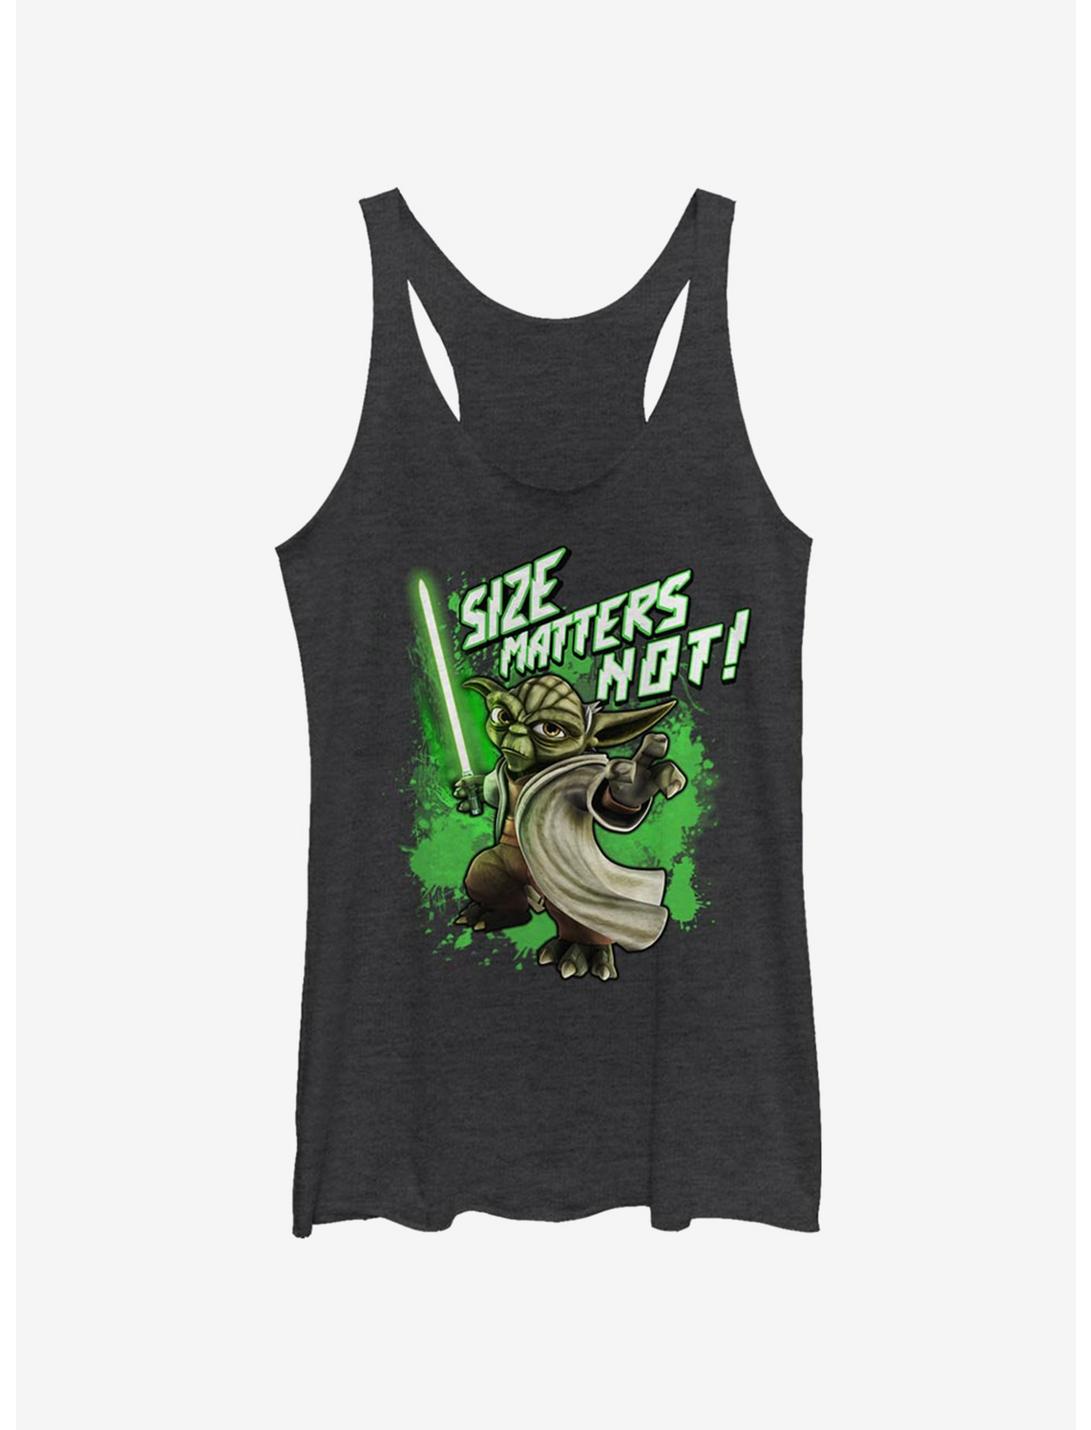 Star Wars: The Clone Wars Yoda Size Matters Not Womens Tank Top, BLK HTR, hi-res